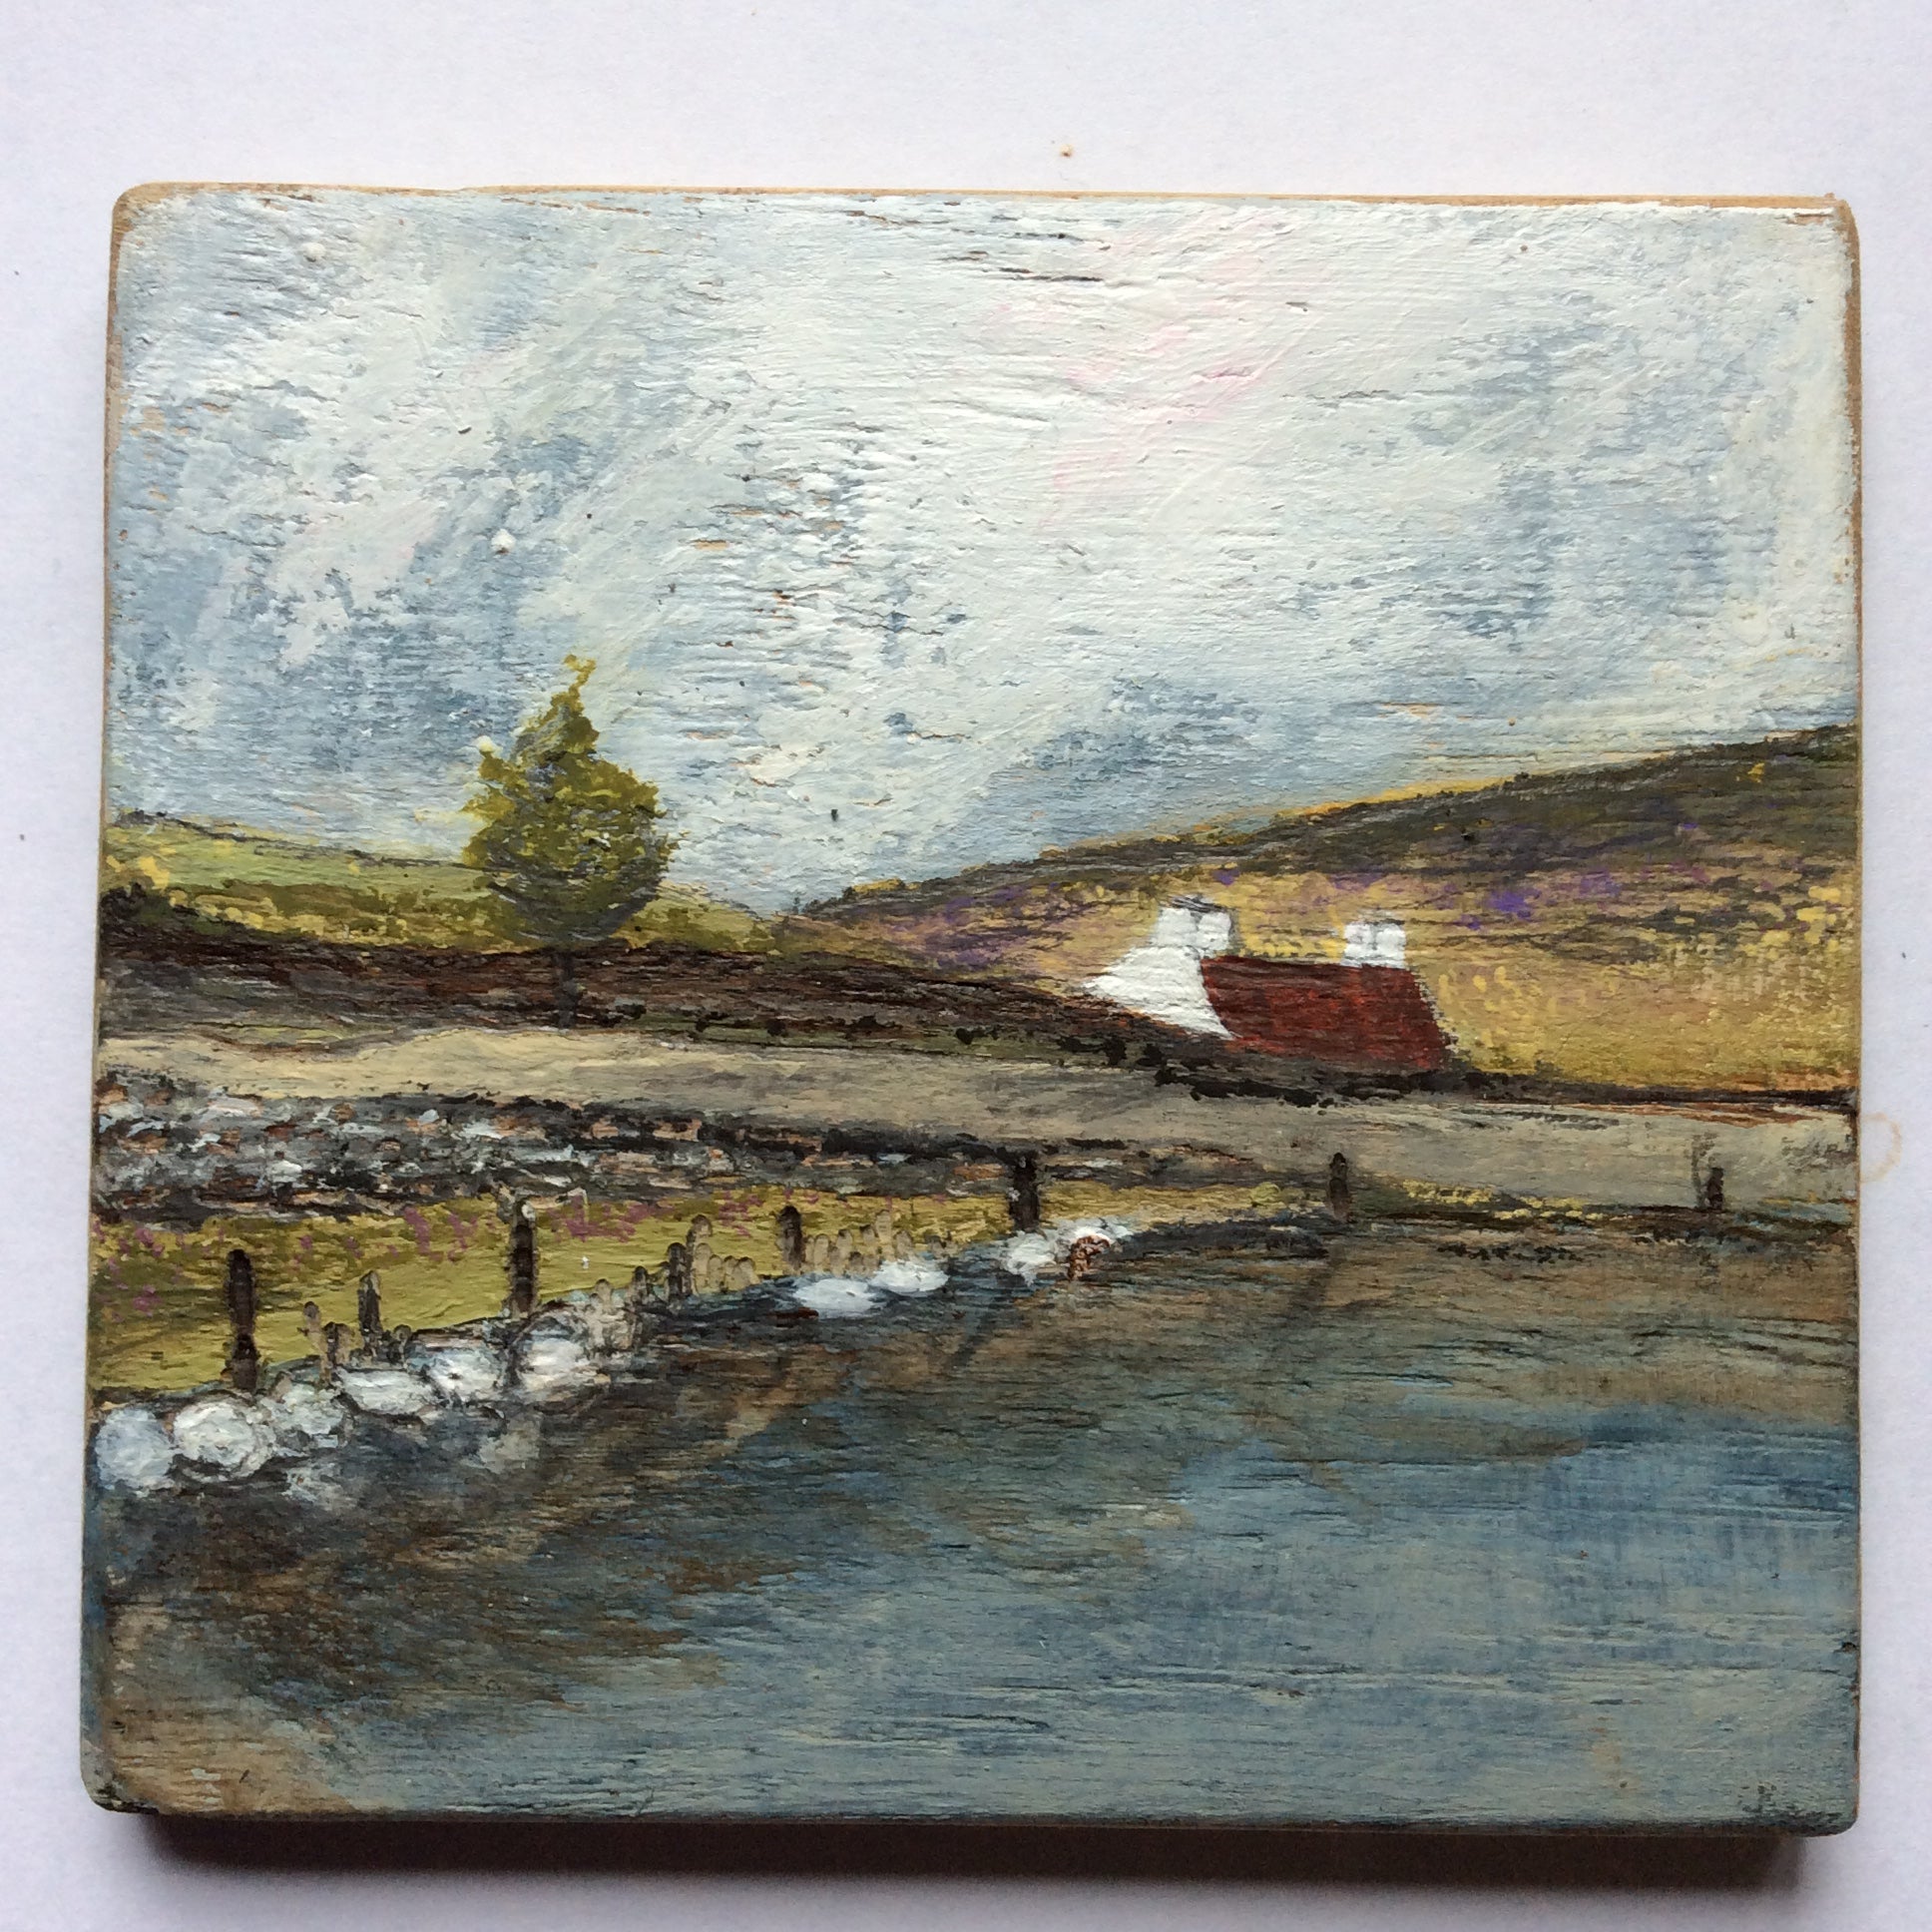 Mixed Media Art on wood By Louise O'Hara - "Stepping stones Along the Tarn”